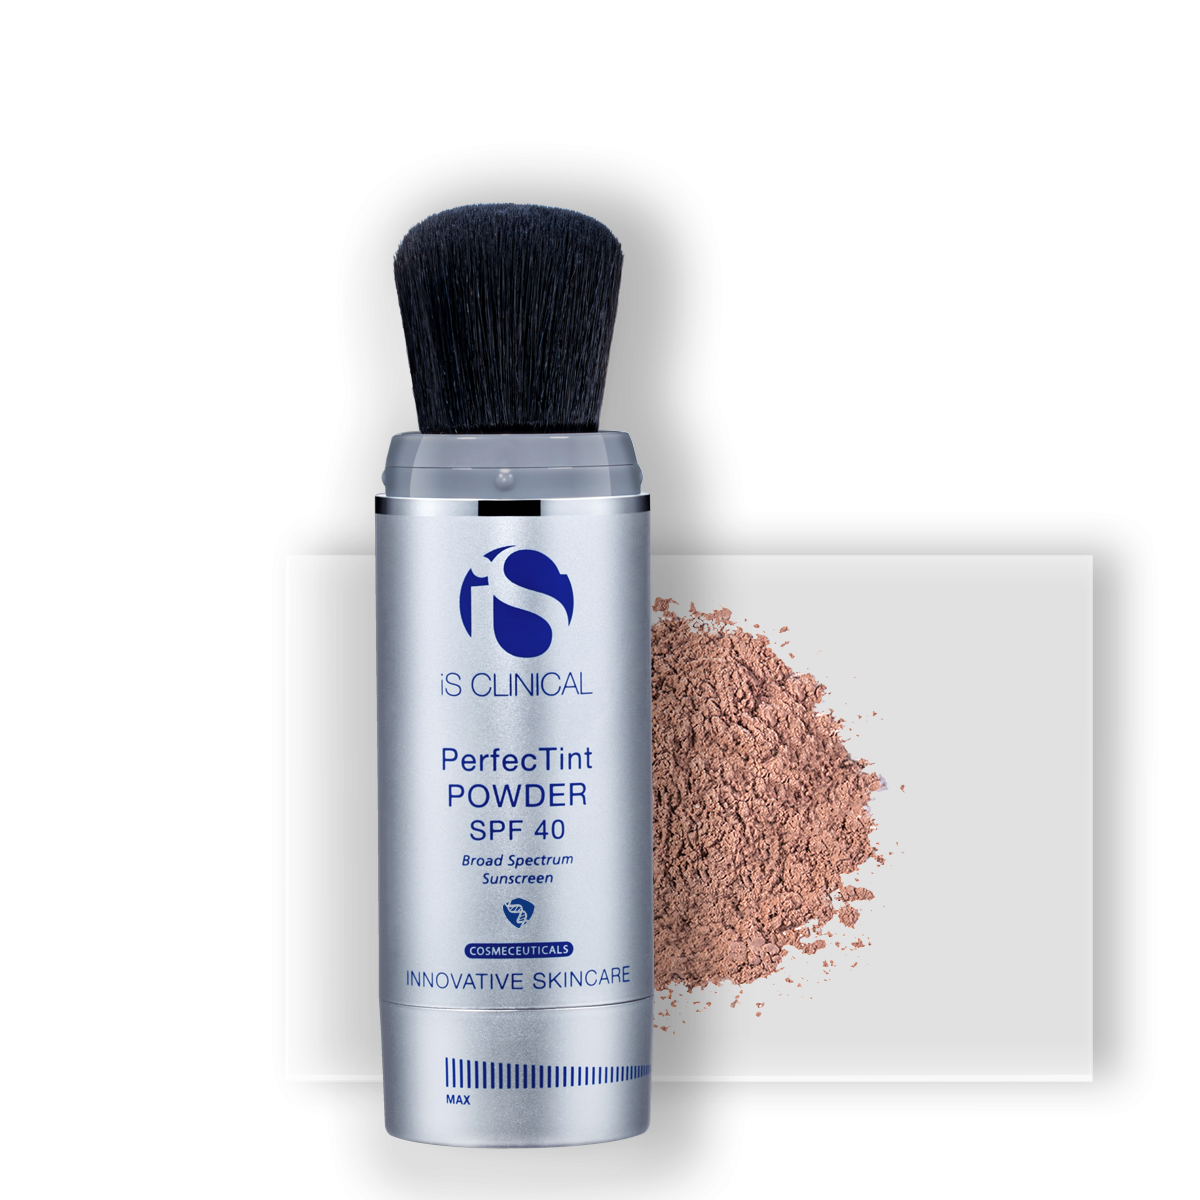 iS Clinical PerfecTint Powder SPF 40 - a cosmetic powder that provides silky smooth broad spectrum coverage to help protect skin against the visible signs of photoaging while minimizing the appearance of pores and absorbing surface oil to create a flawless finish. Shown in bronze.